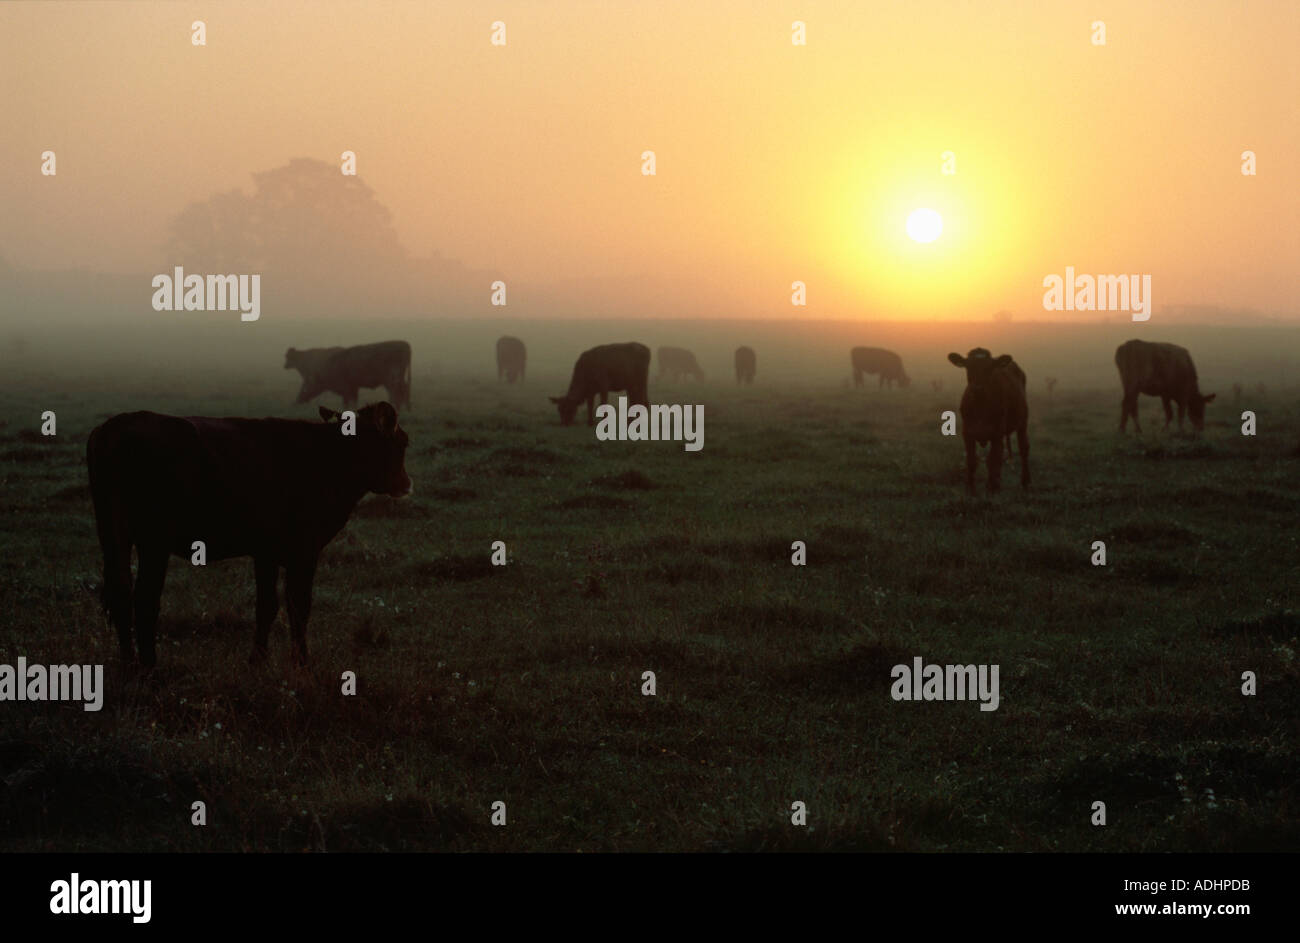 Cows on a field at sunrise Stock Photo